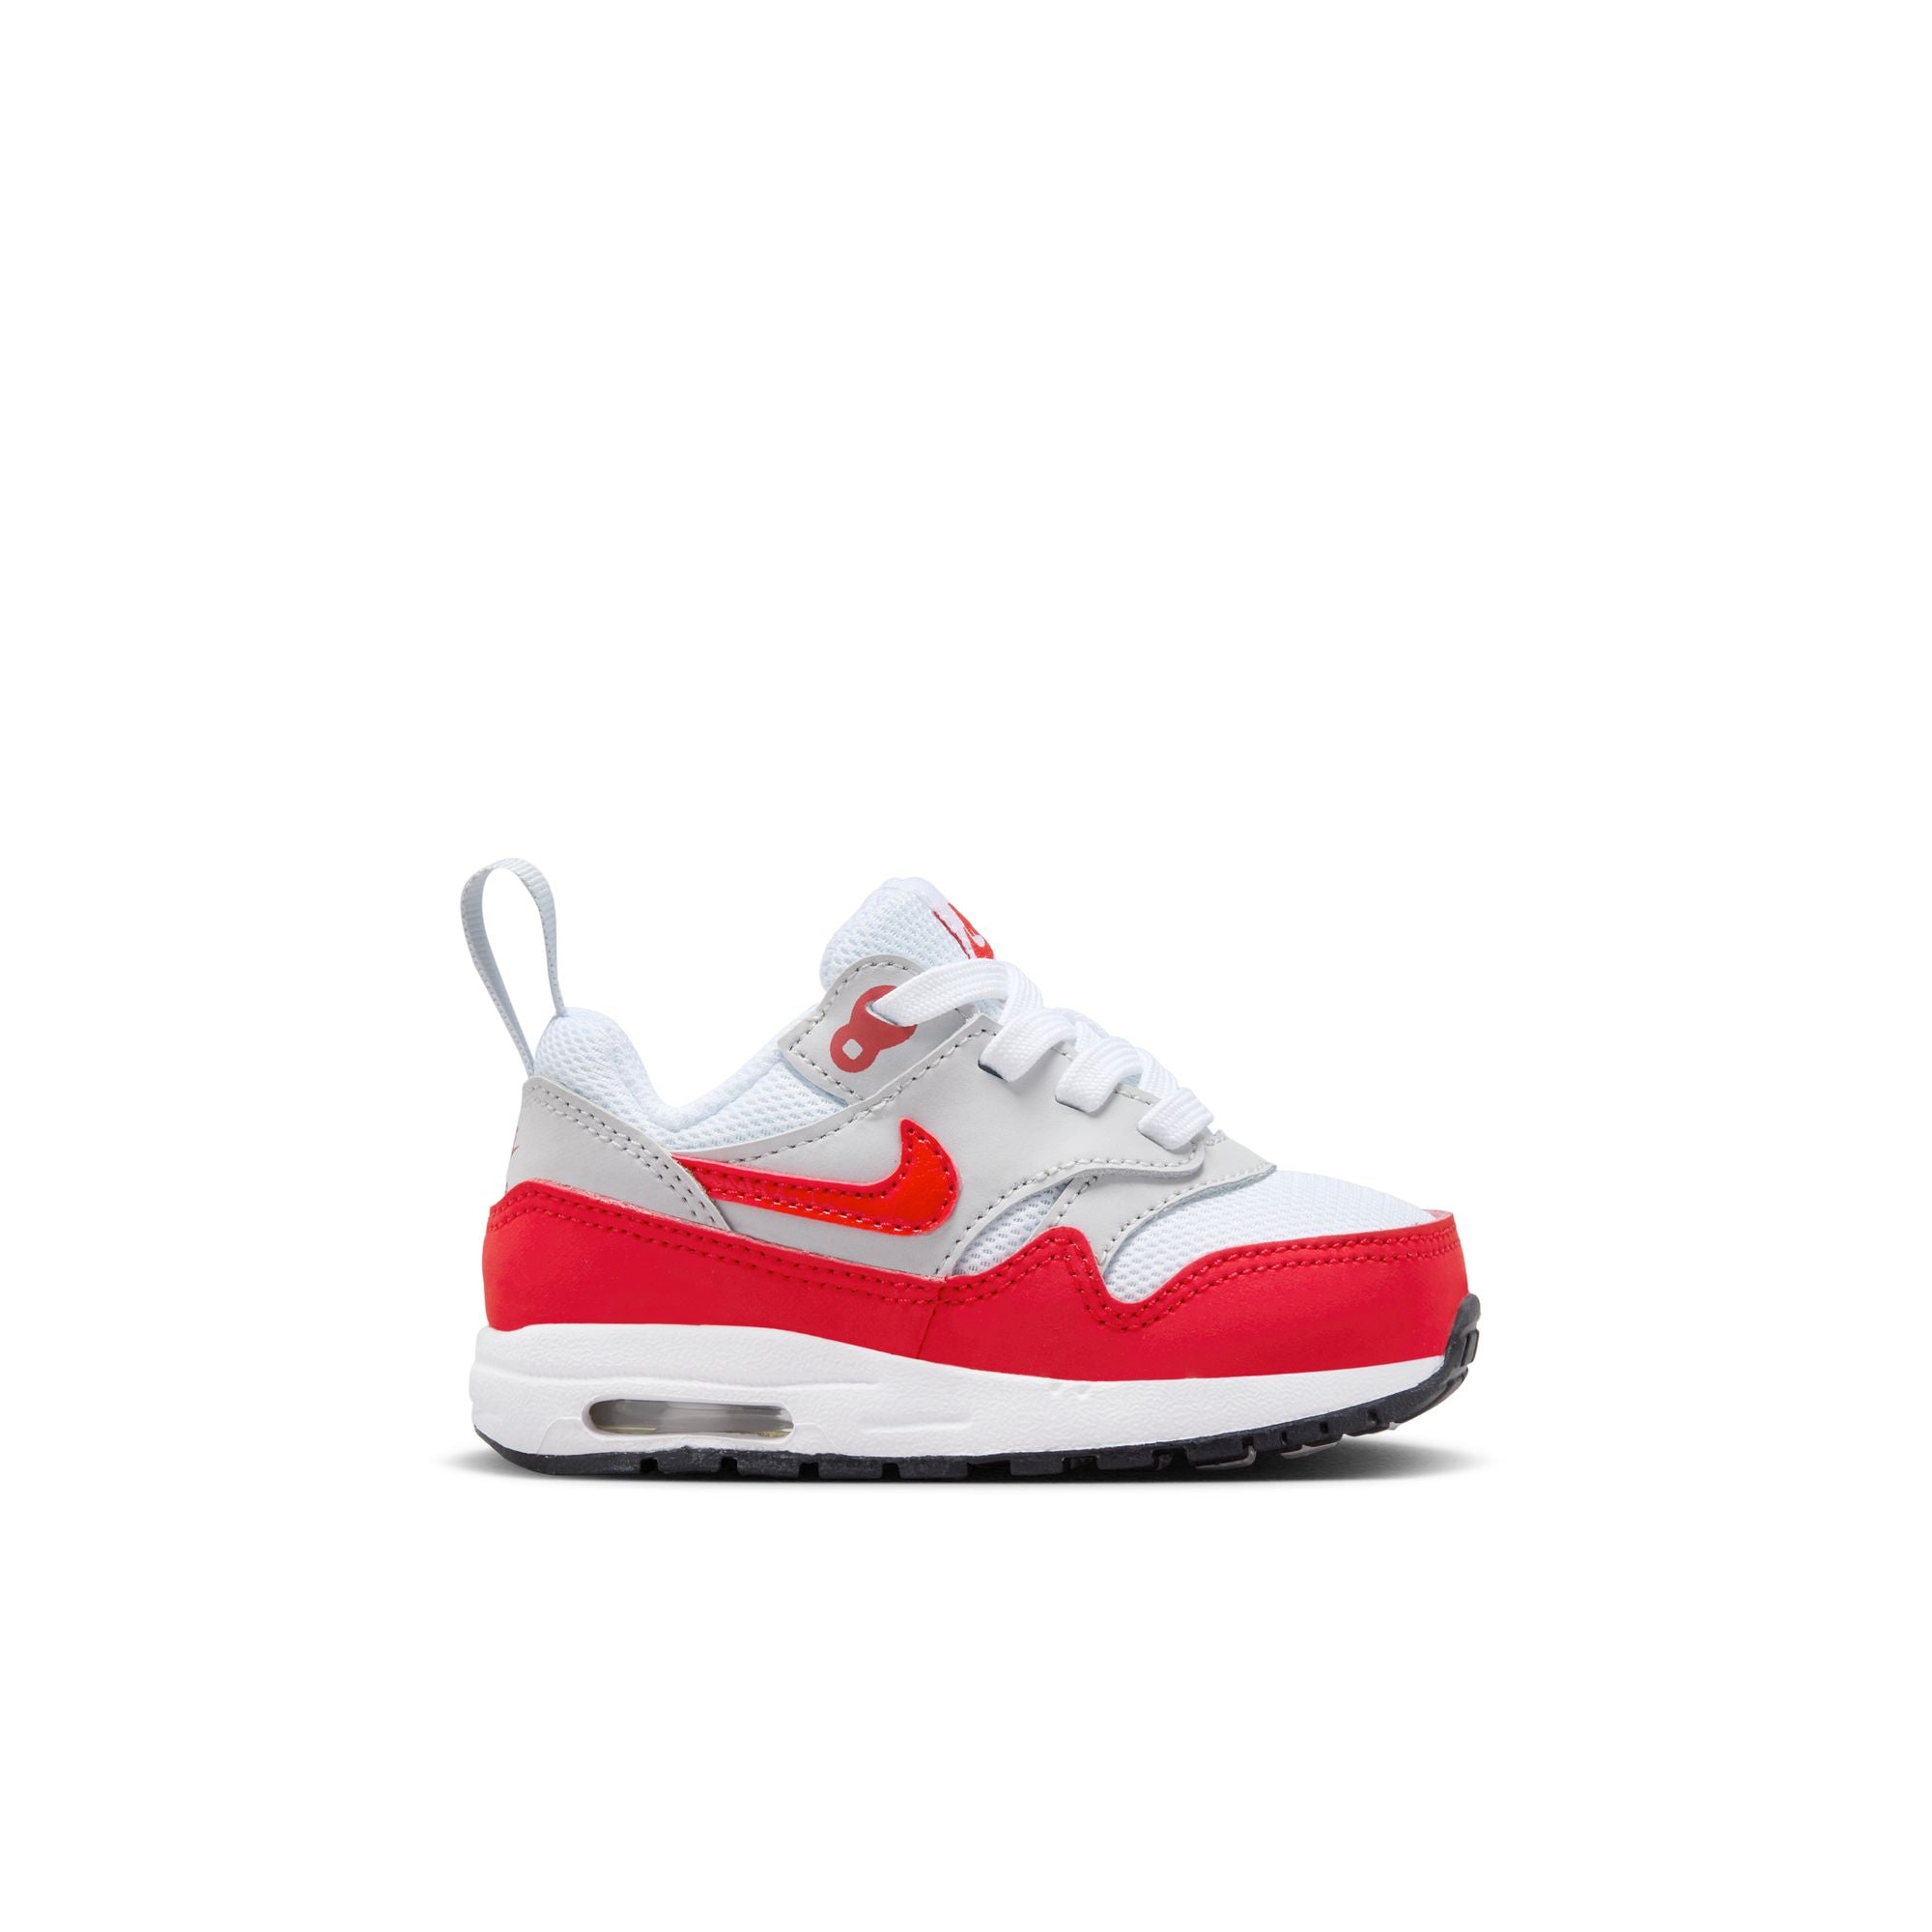 AIR MAX 1 EZ BABY/TODDLER SHOES